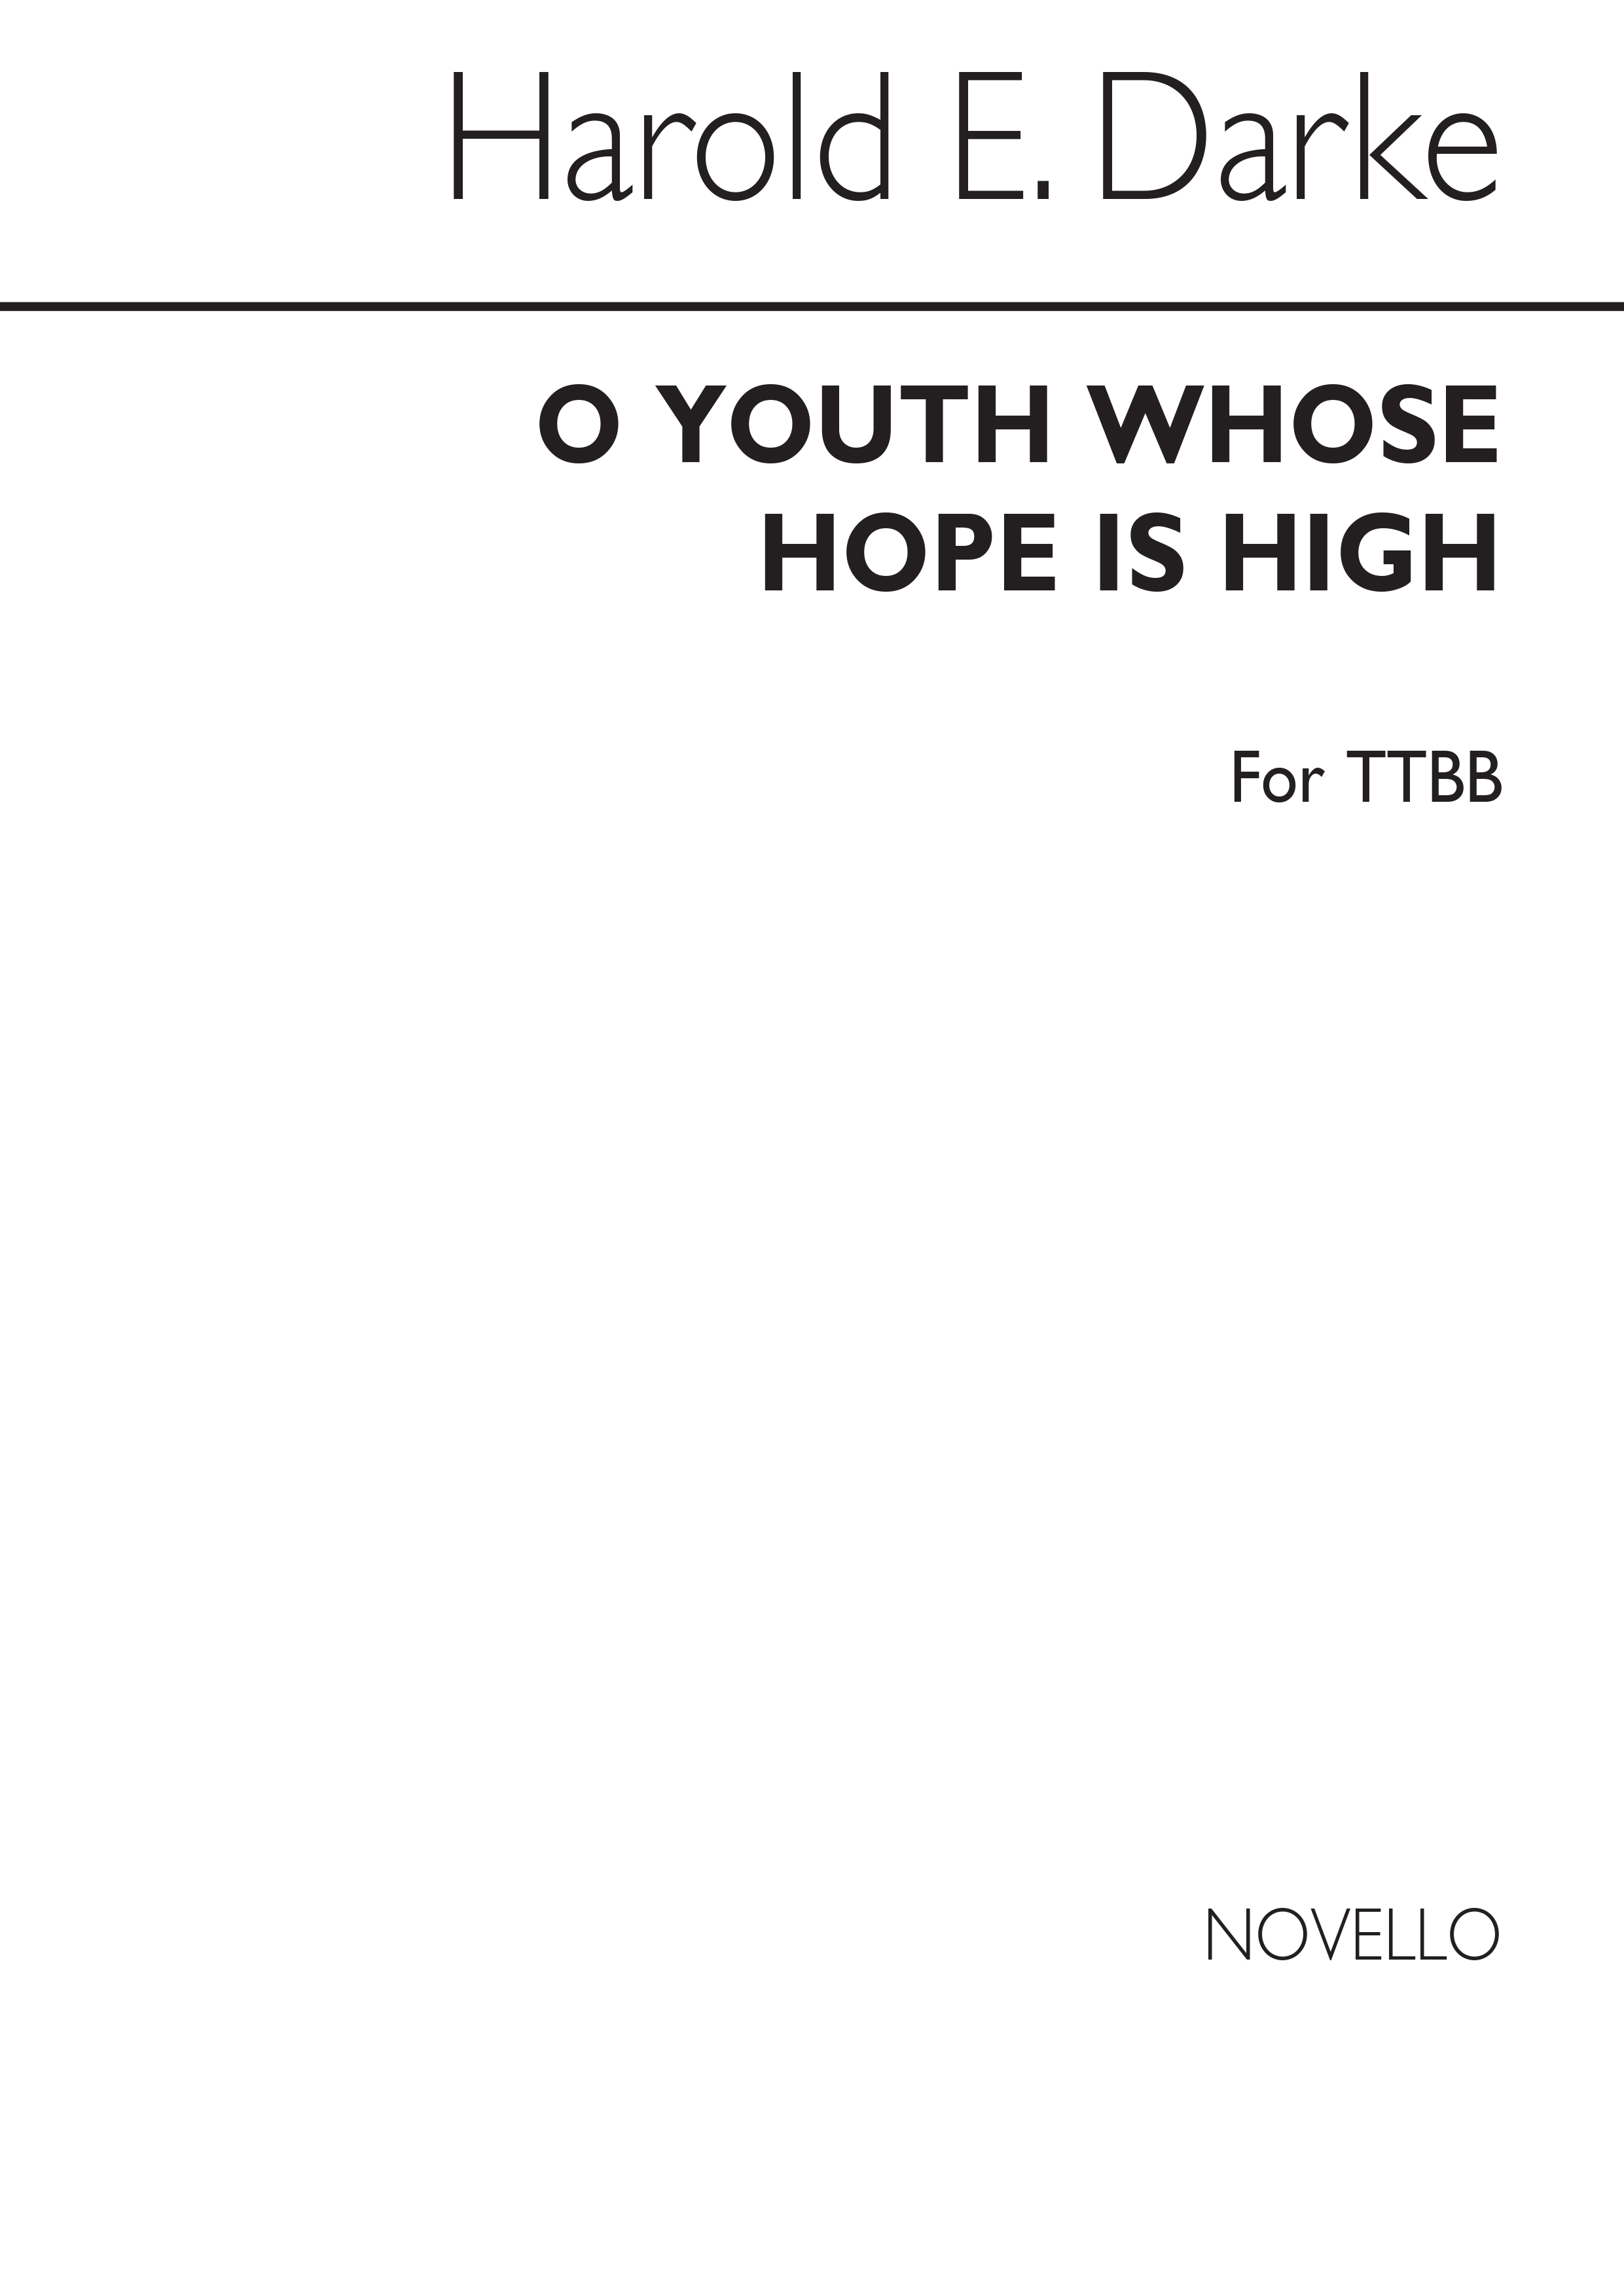 Harold Darke: O Youth Whose Hope Is High for TTBB Chorus: Men's Voices: